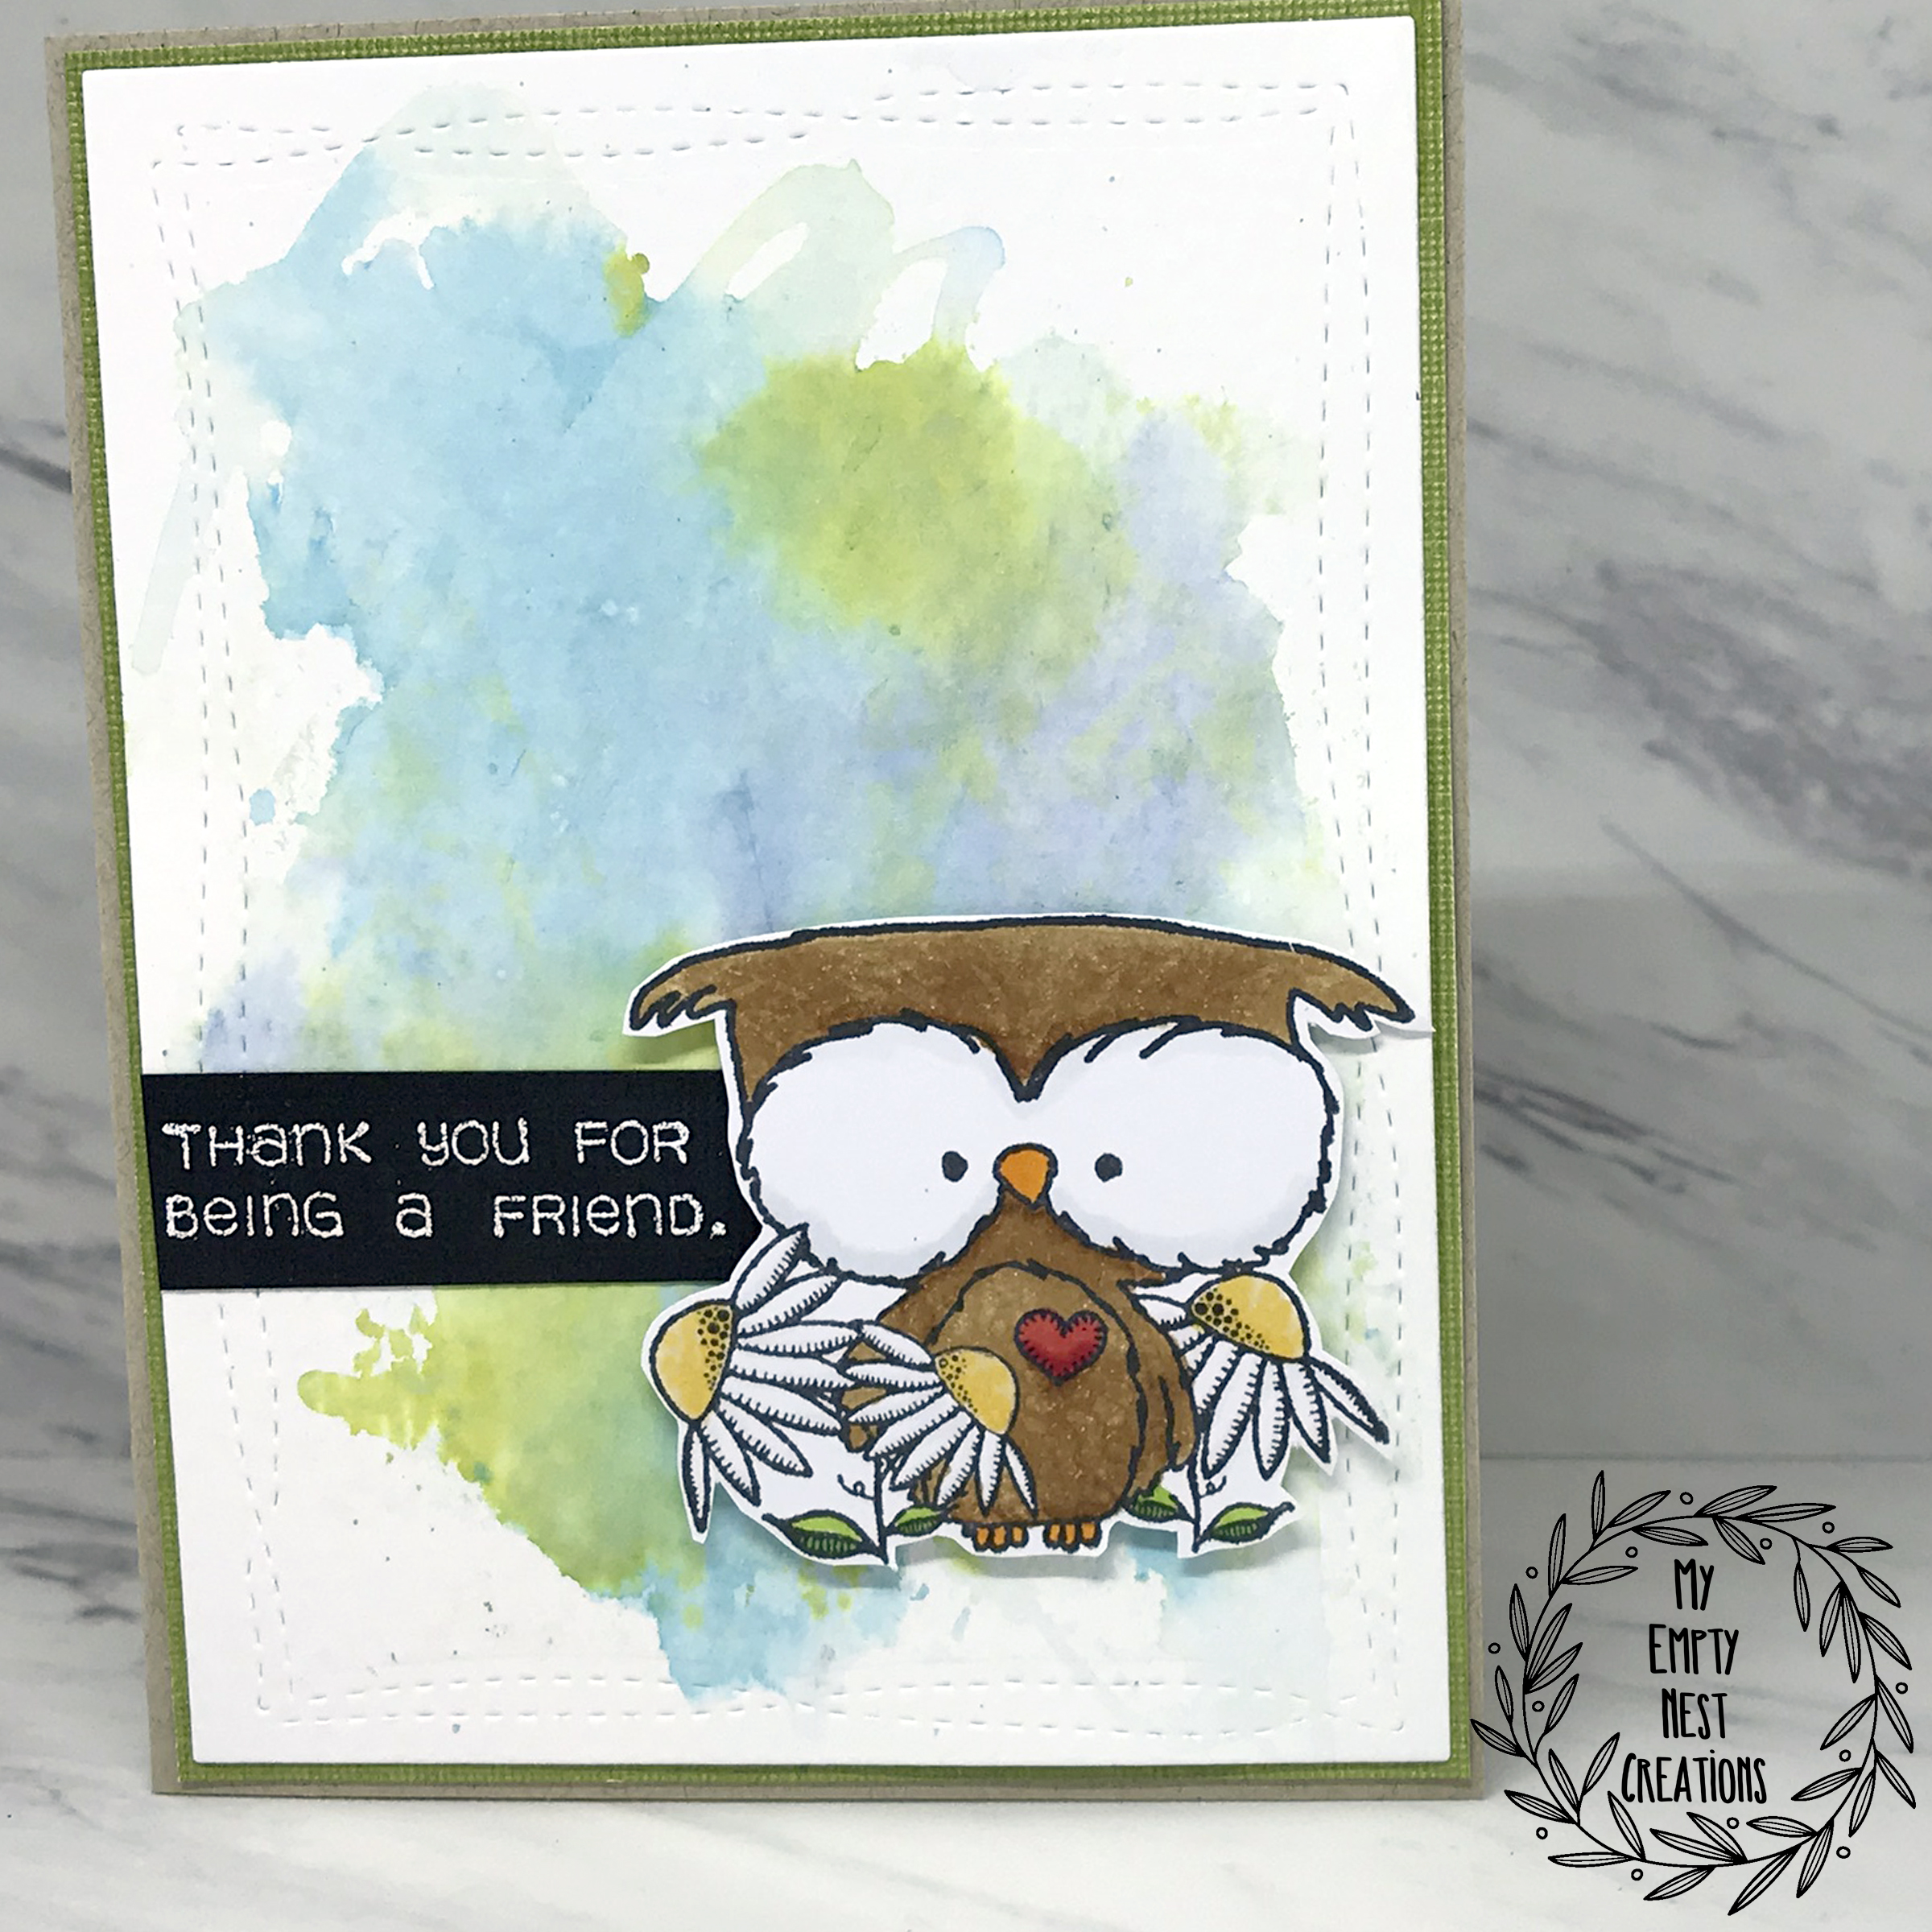 My Empty Nest Creations Unity Stamp Lil Bloomin Owl over Watercolor Background